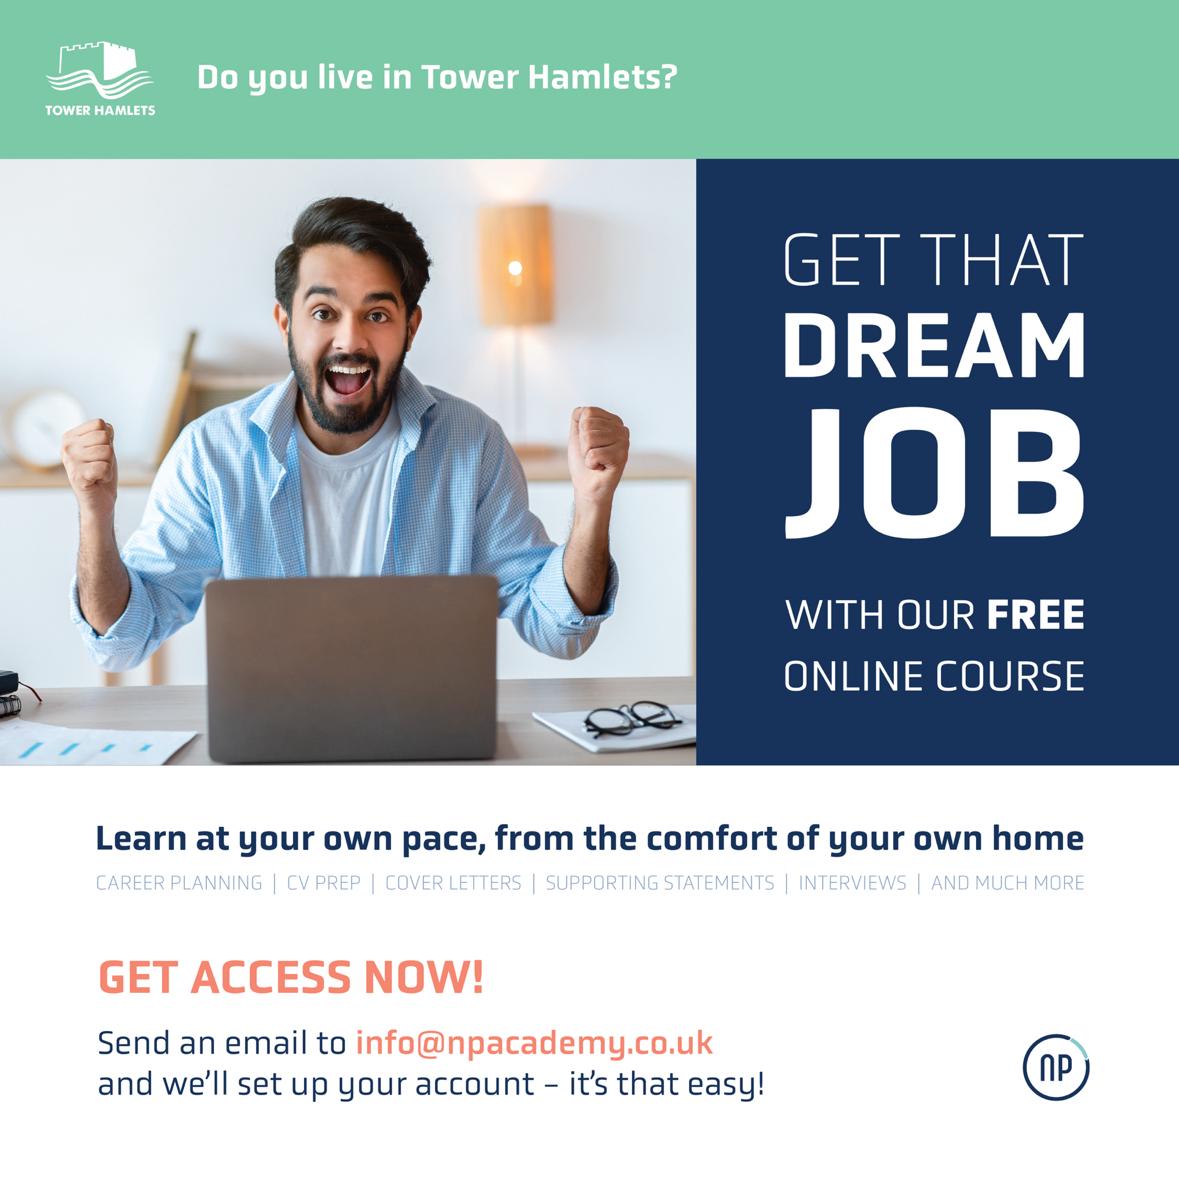 Free online course to help you find your dream job. Please contact info@npacademy.co.uk @THHomes @TowerHamletsNow